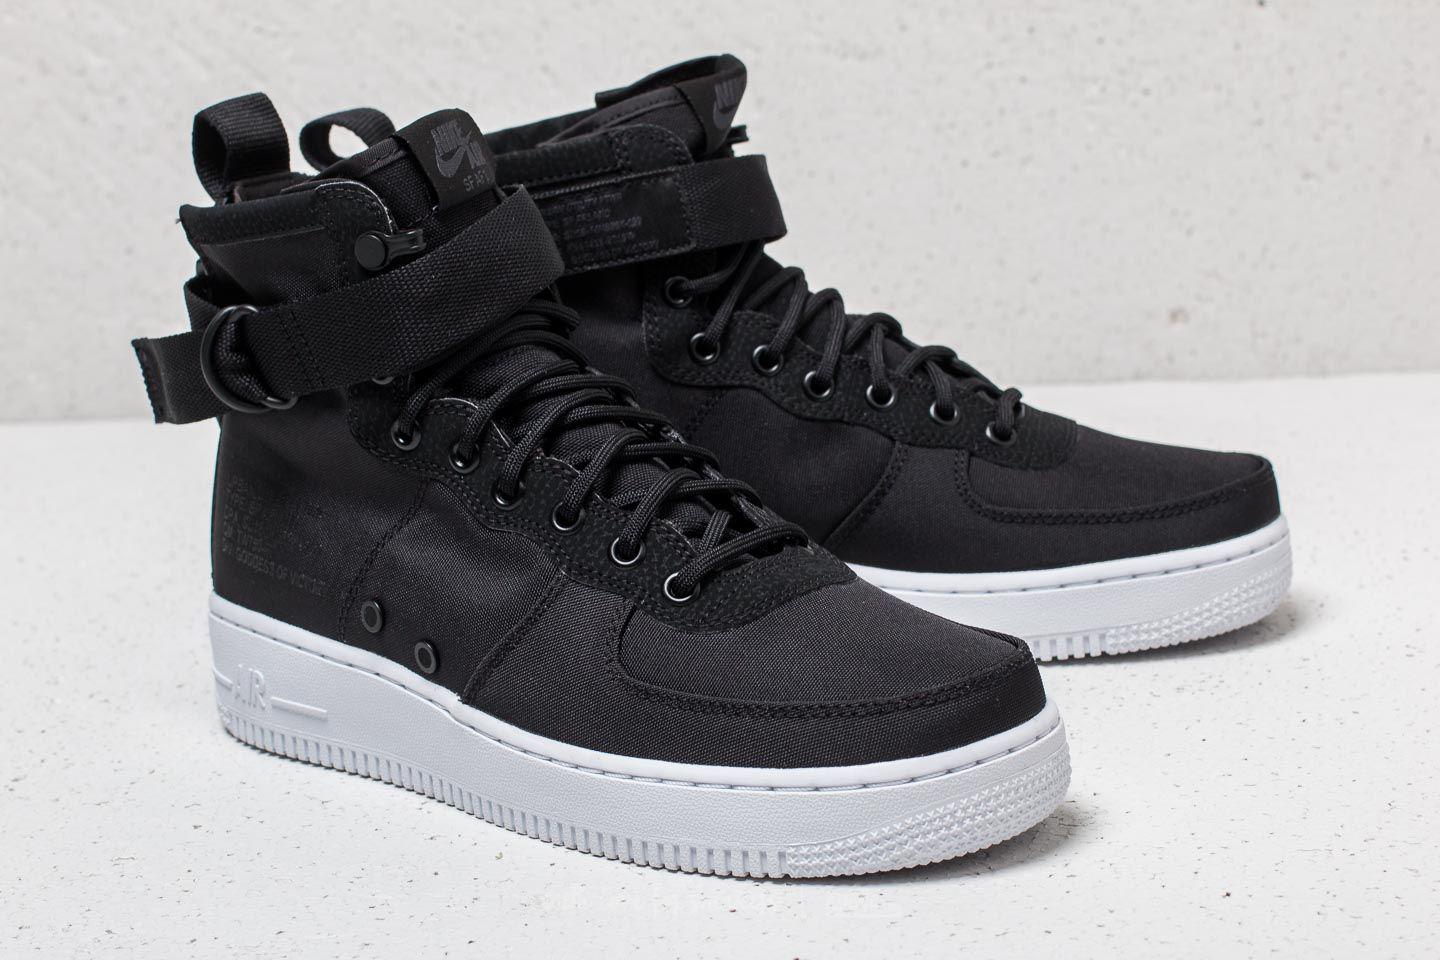 nike special field air force 1 mid black